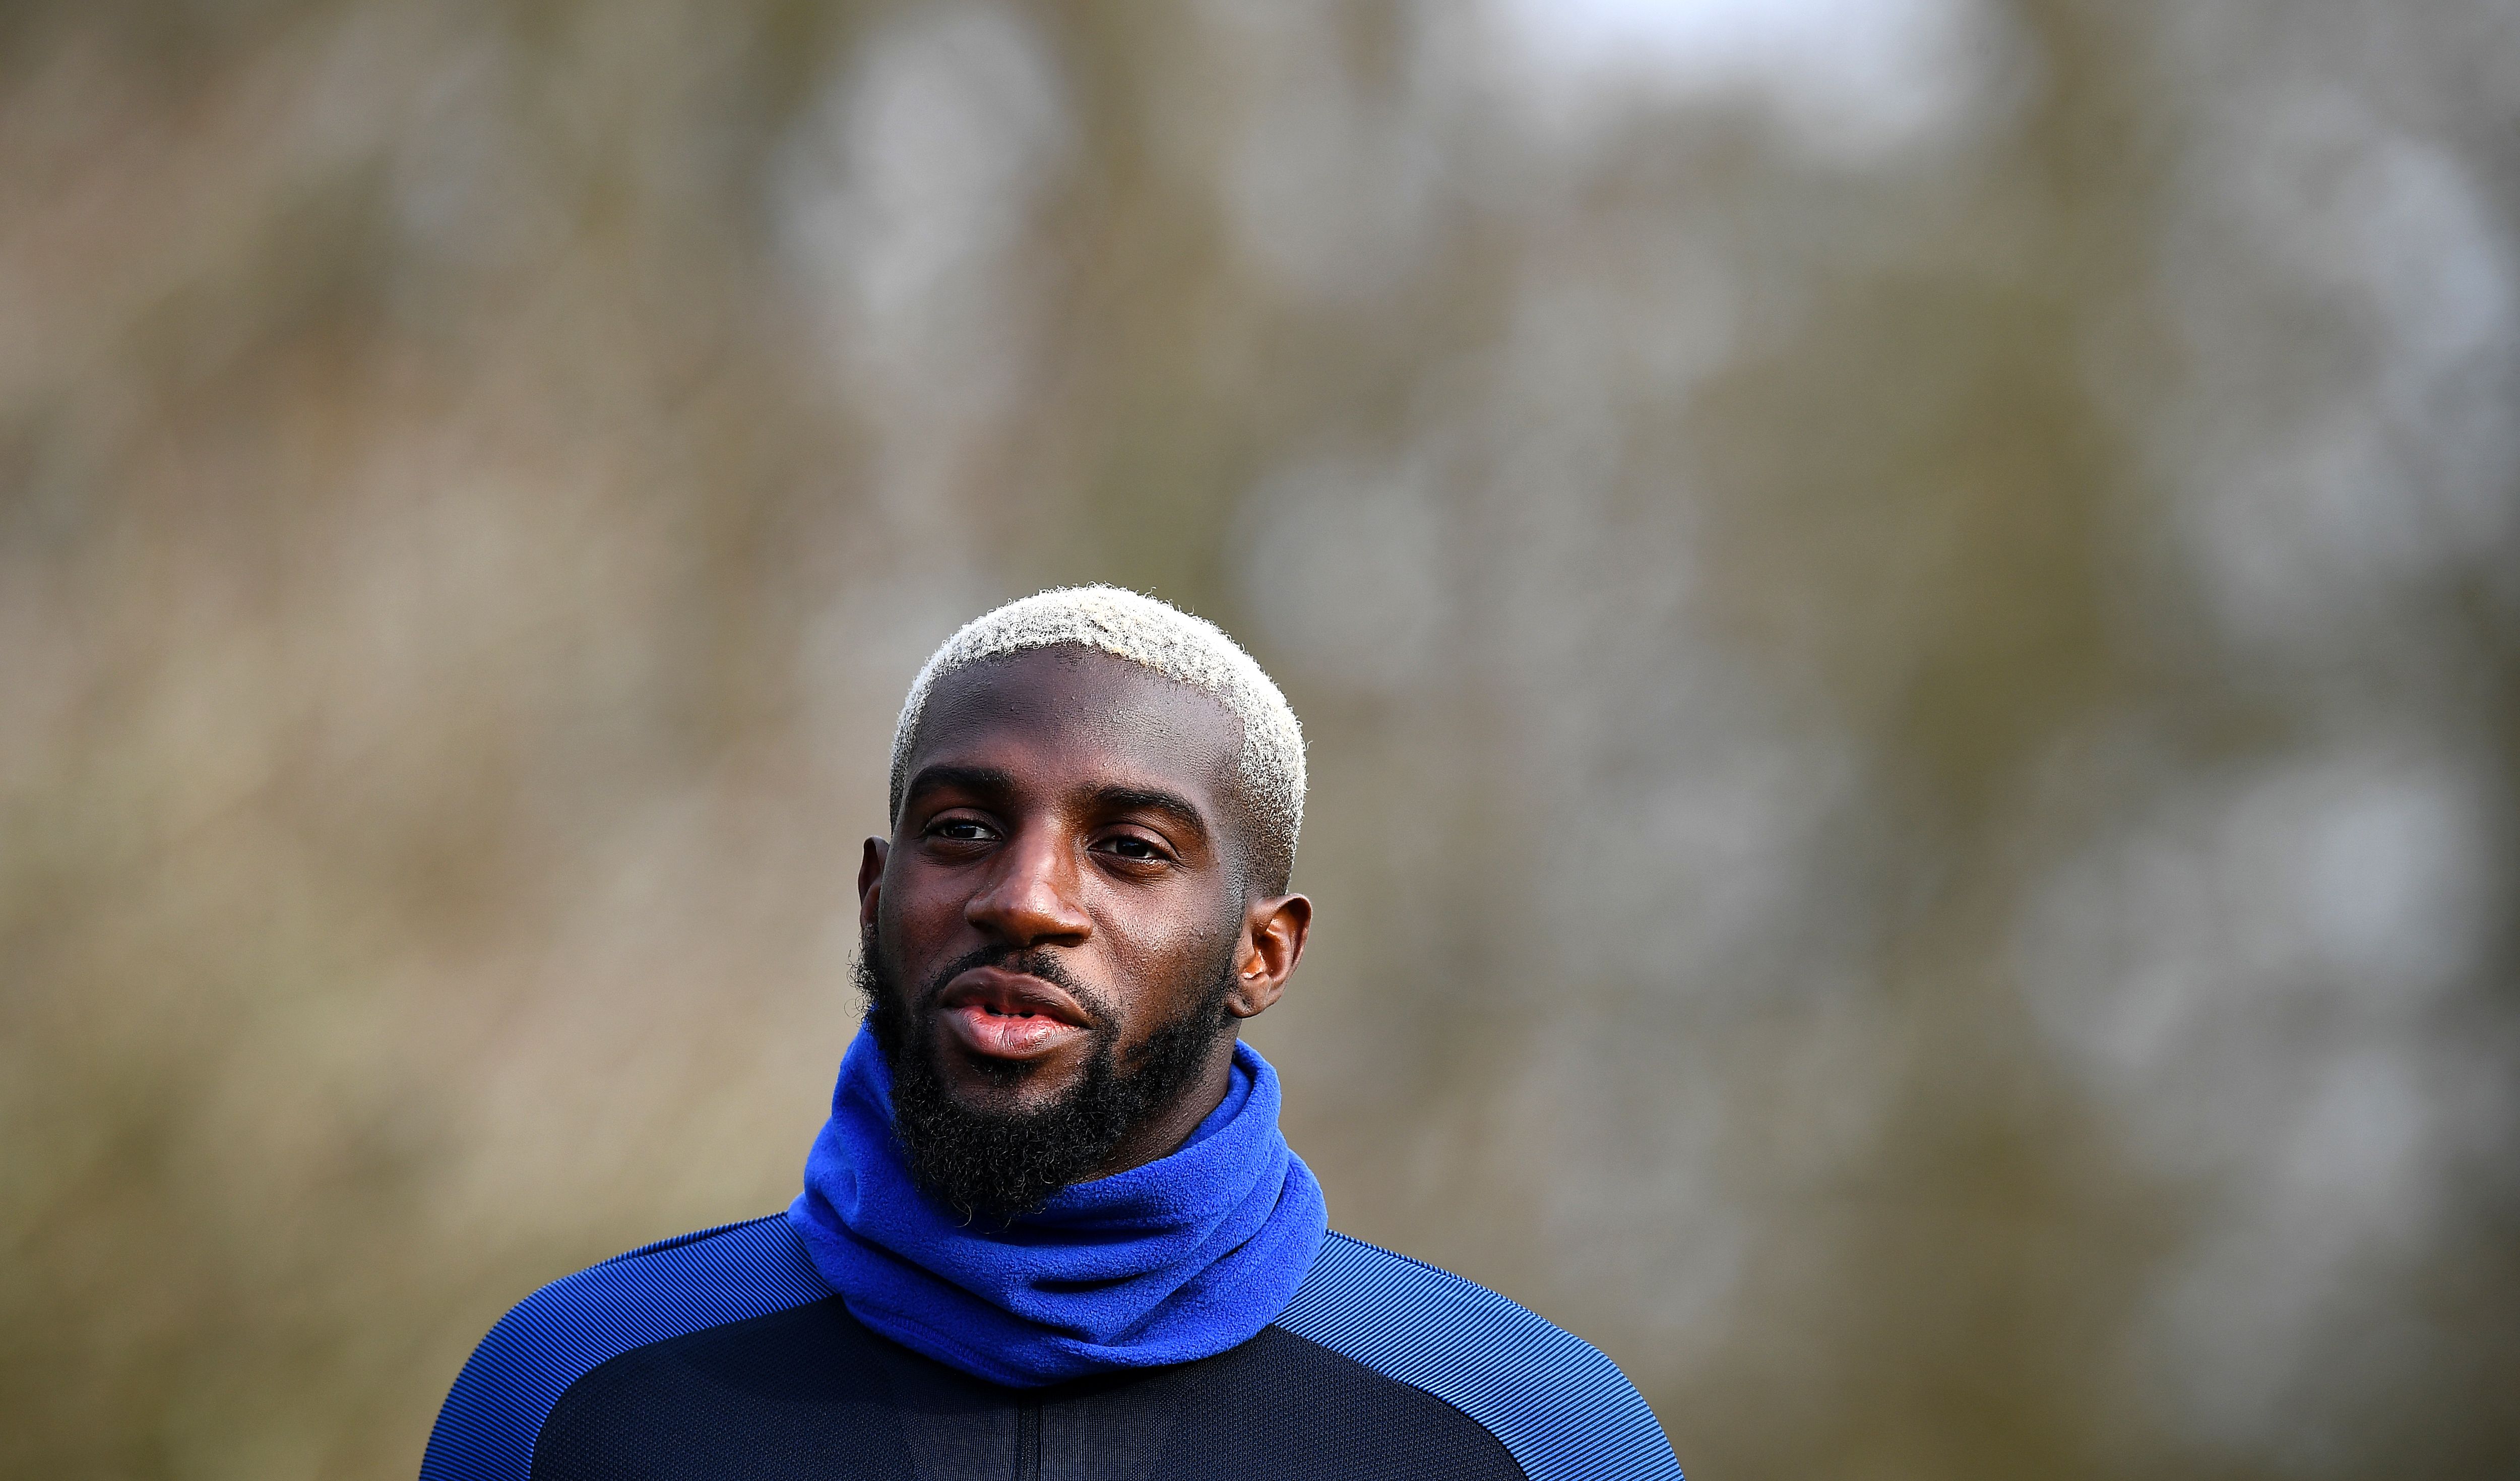 France's midfielder Tiemoue Bakayoko arrives for a training session in Clairefontaine, near Paris, on March 21, 2017, as part of the team's preparation for the upcoming World Cup 2018 qualifiers.  
 / AFP PHOTO / FRANCK FIFE        (Photo credit should read FRANCK FIFE/AFP/Getty Images)